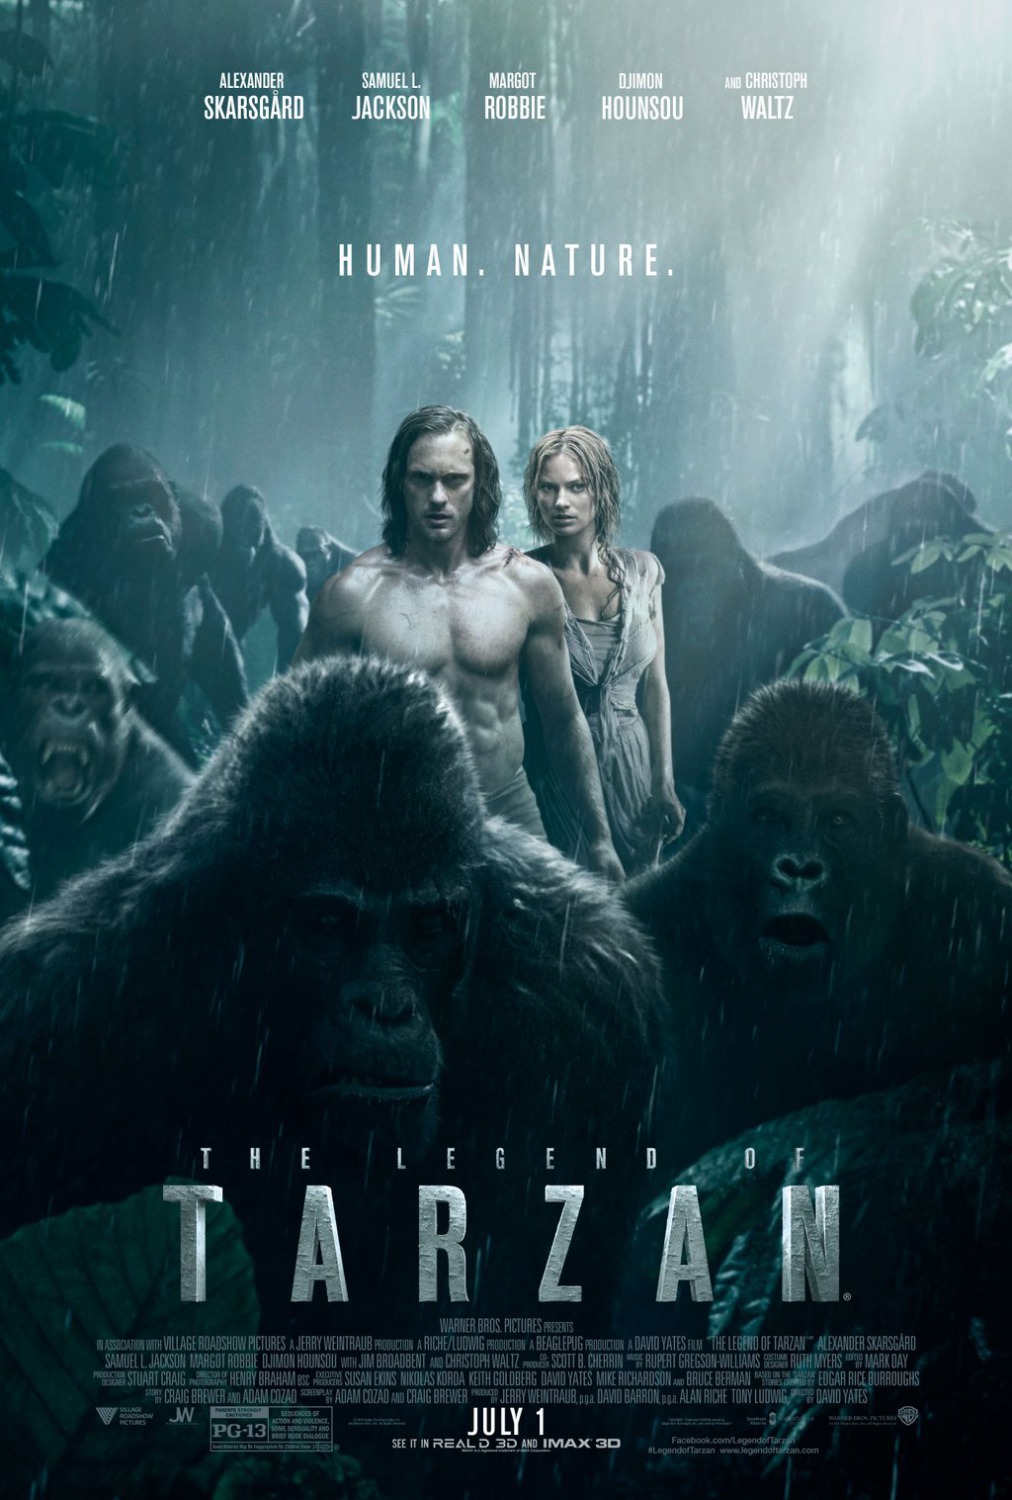 april maier recommends tarzan full movie free pic